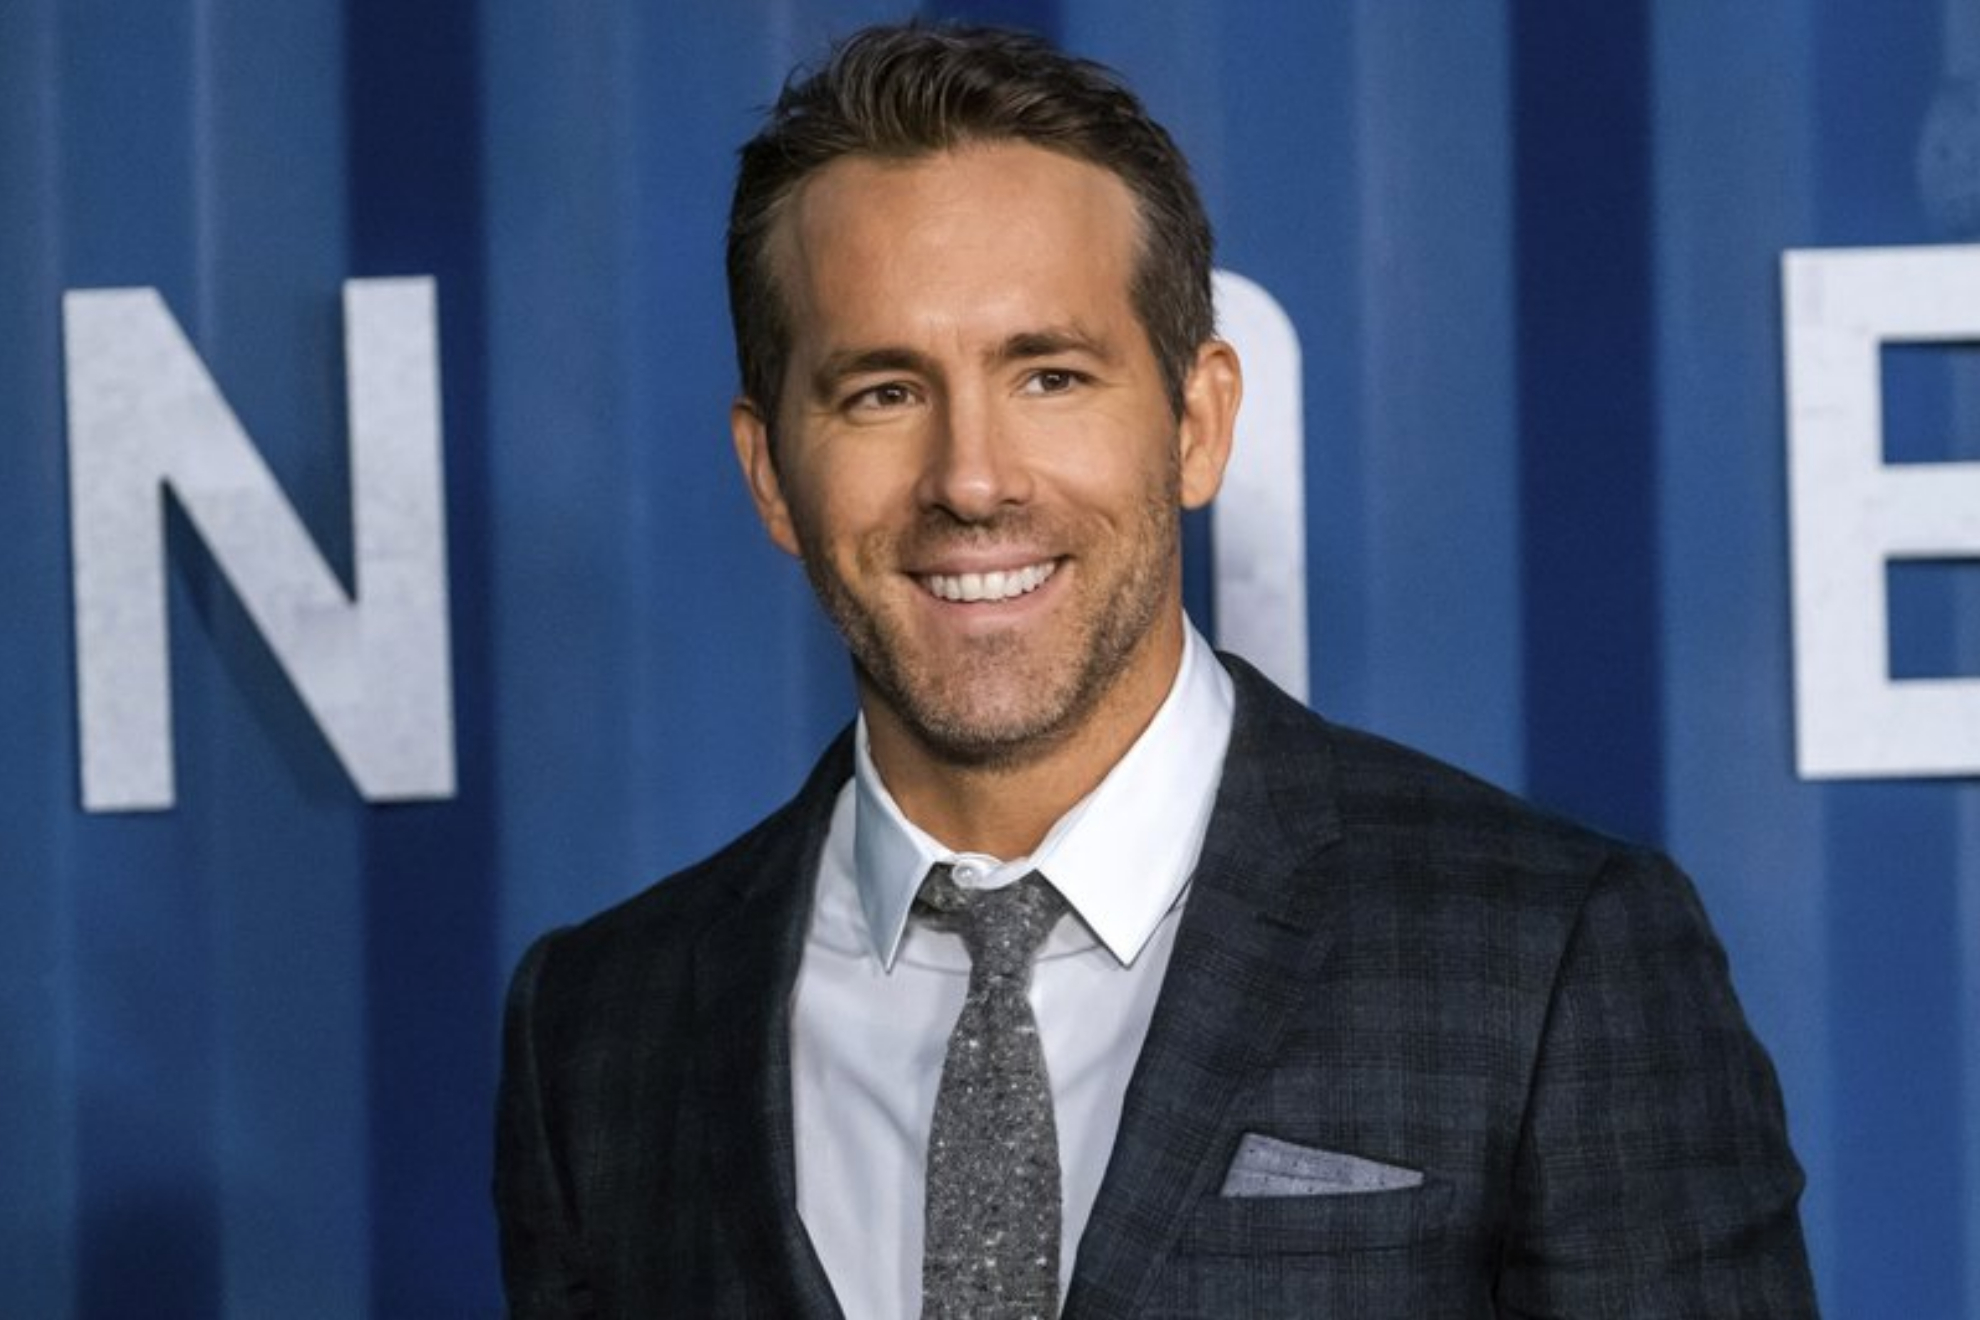 Group of Investors with Ryan Reynolds Purchase 24% Stake of F1 Team Alpine for €200 Million